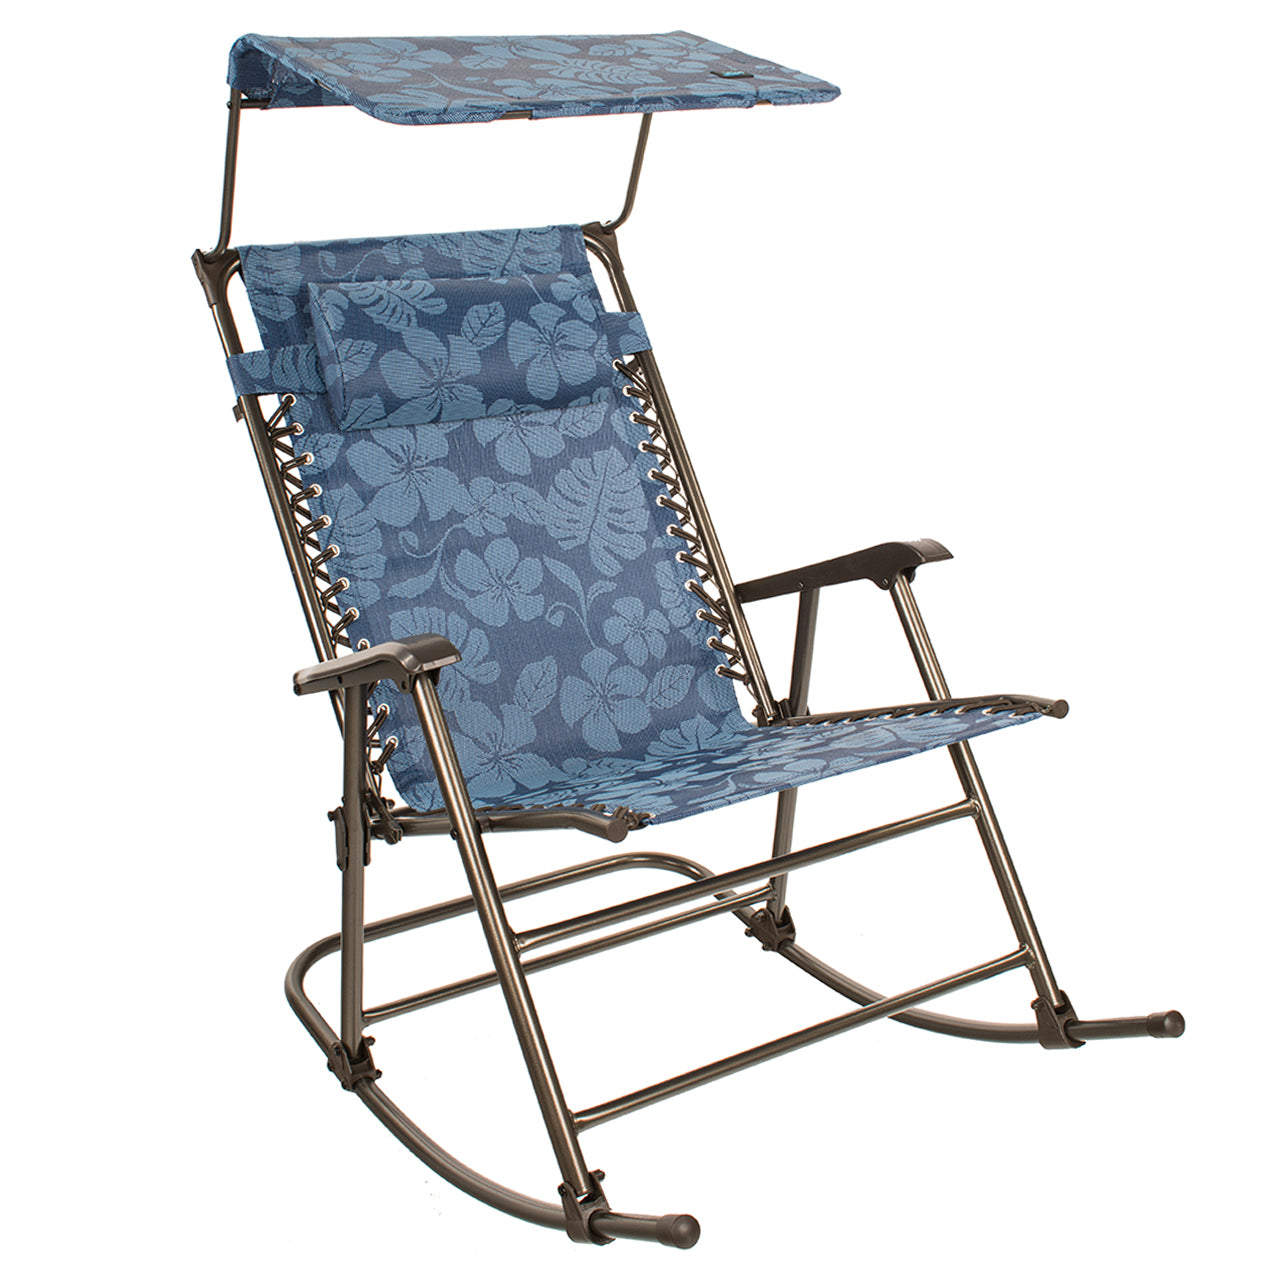 Bliss Hammocks 27-inch Wide Rocking Chair with Canopy and Pillow in the blue flowers variation.